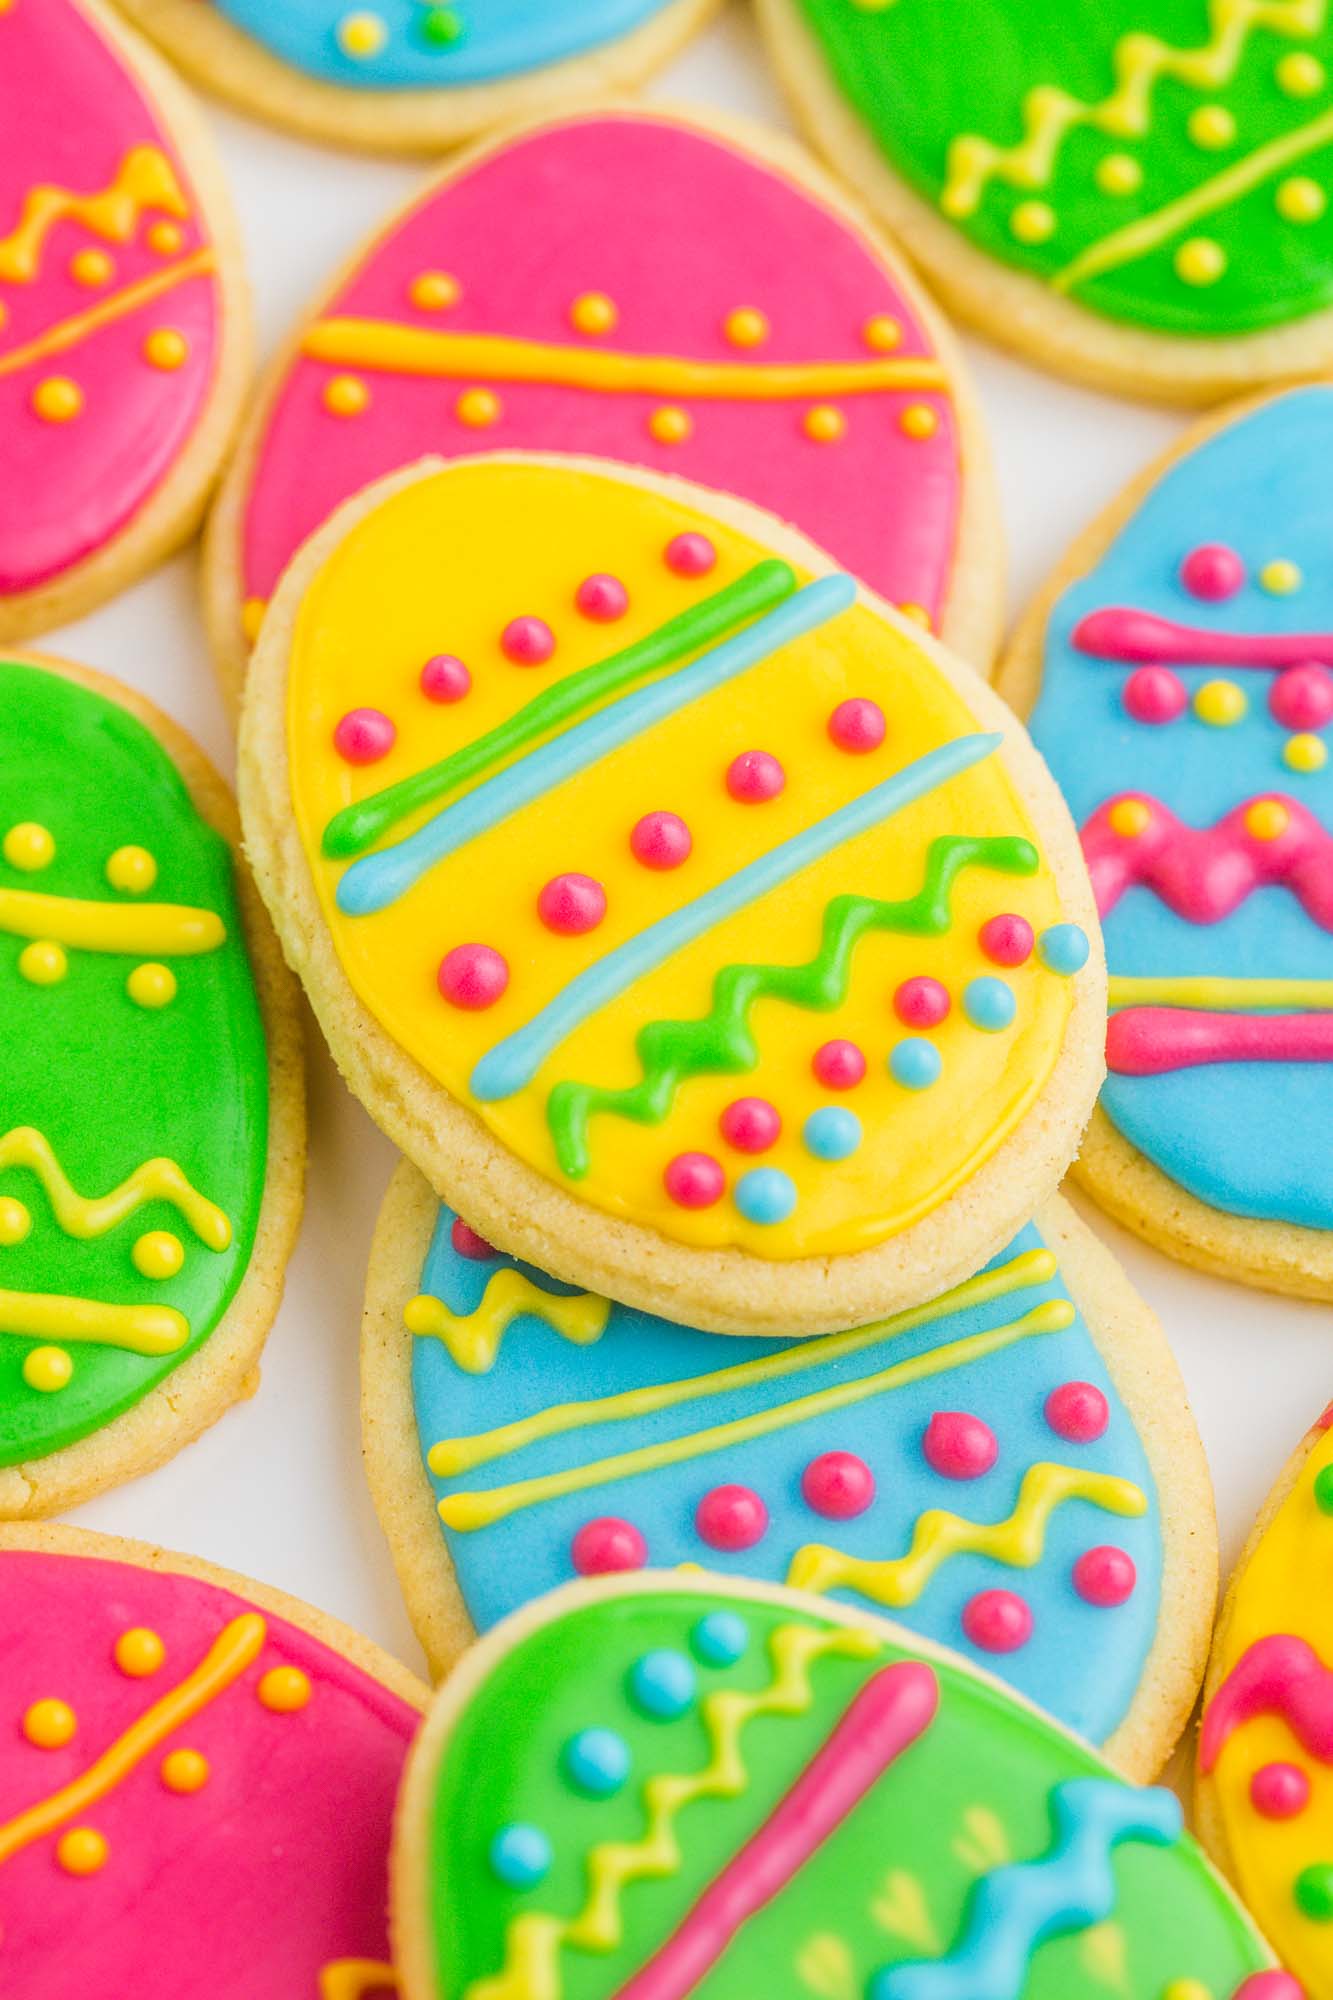 Egg shaped sugar cookies decorated with lines, dots, and squiggles in bright neon colors